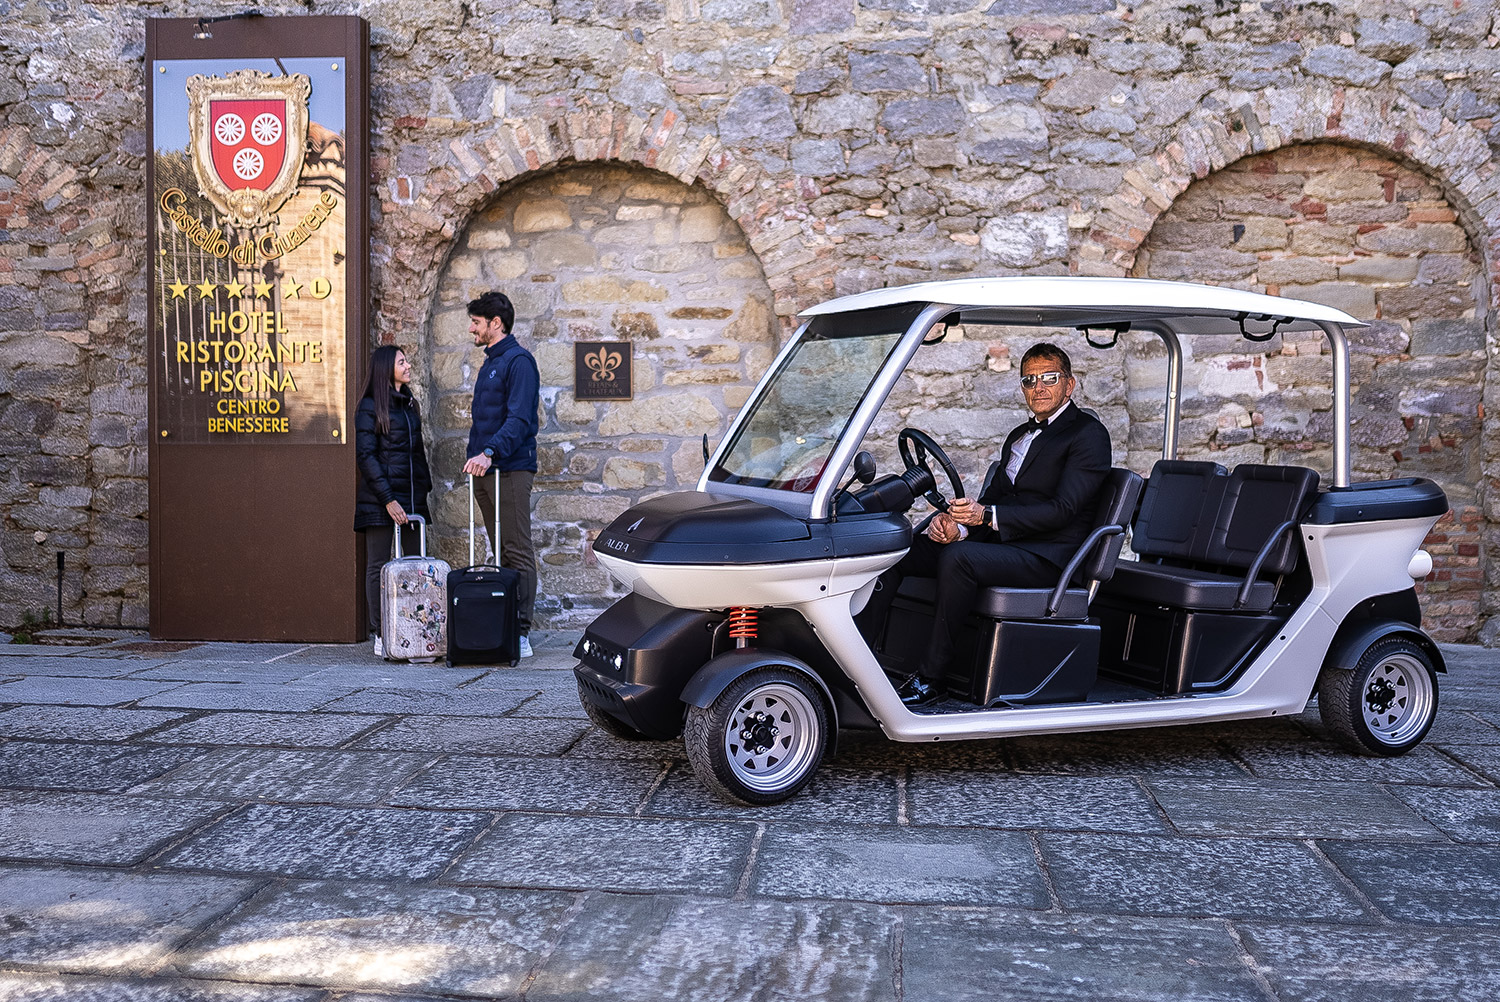 Electric vehicles for hotels, resorts and campsites